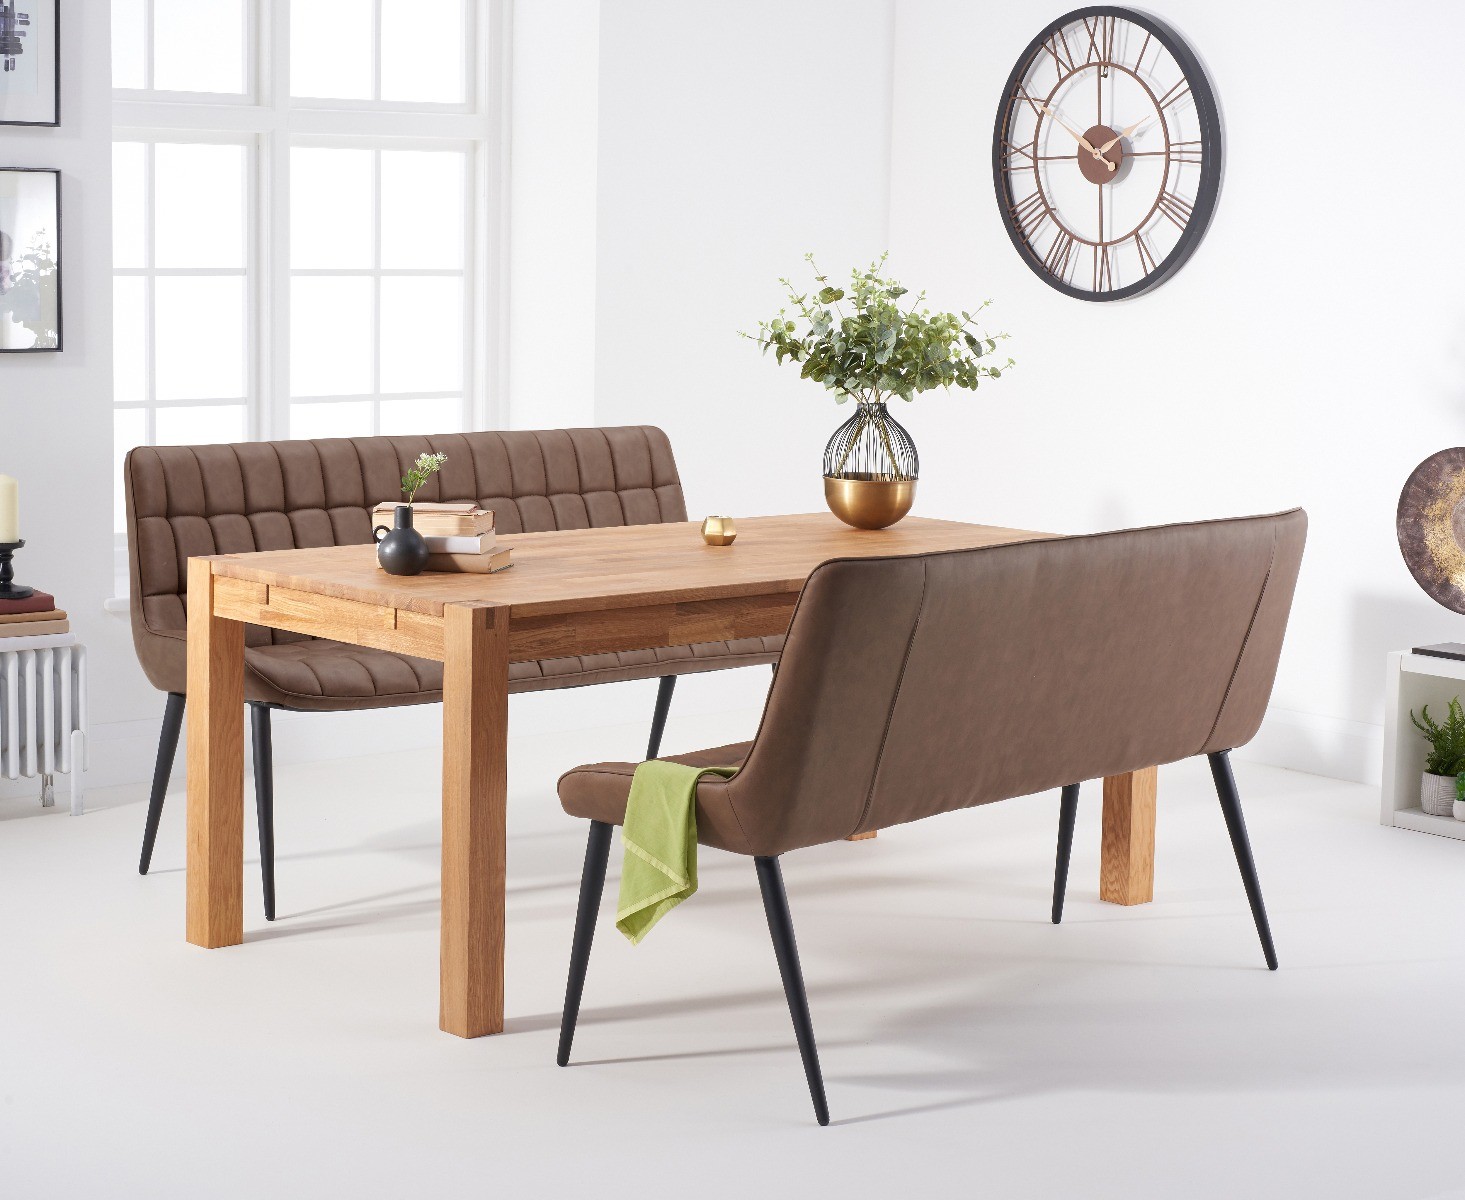 Verona 150cm Oak Table With Heidi Brown Faux Leather Benches